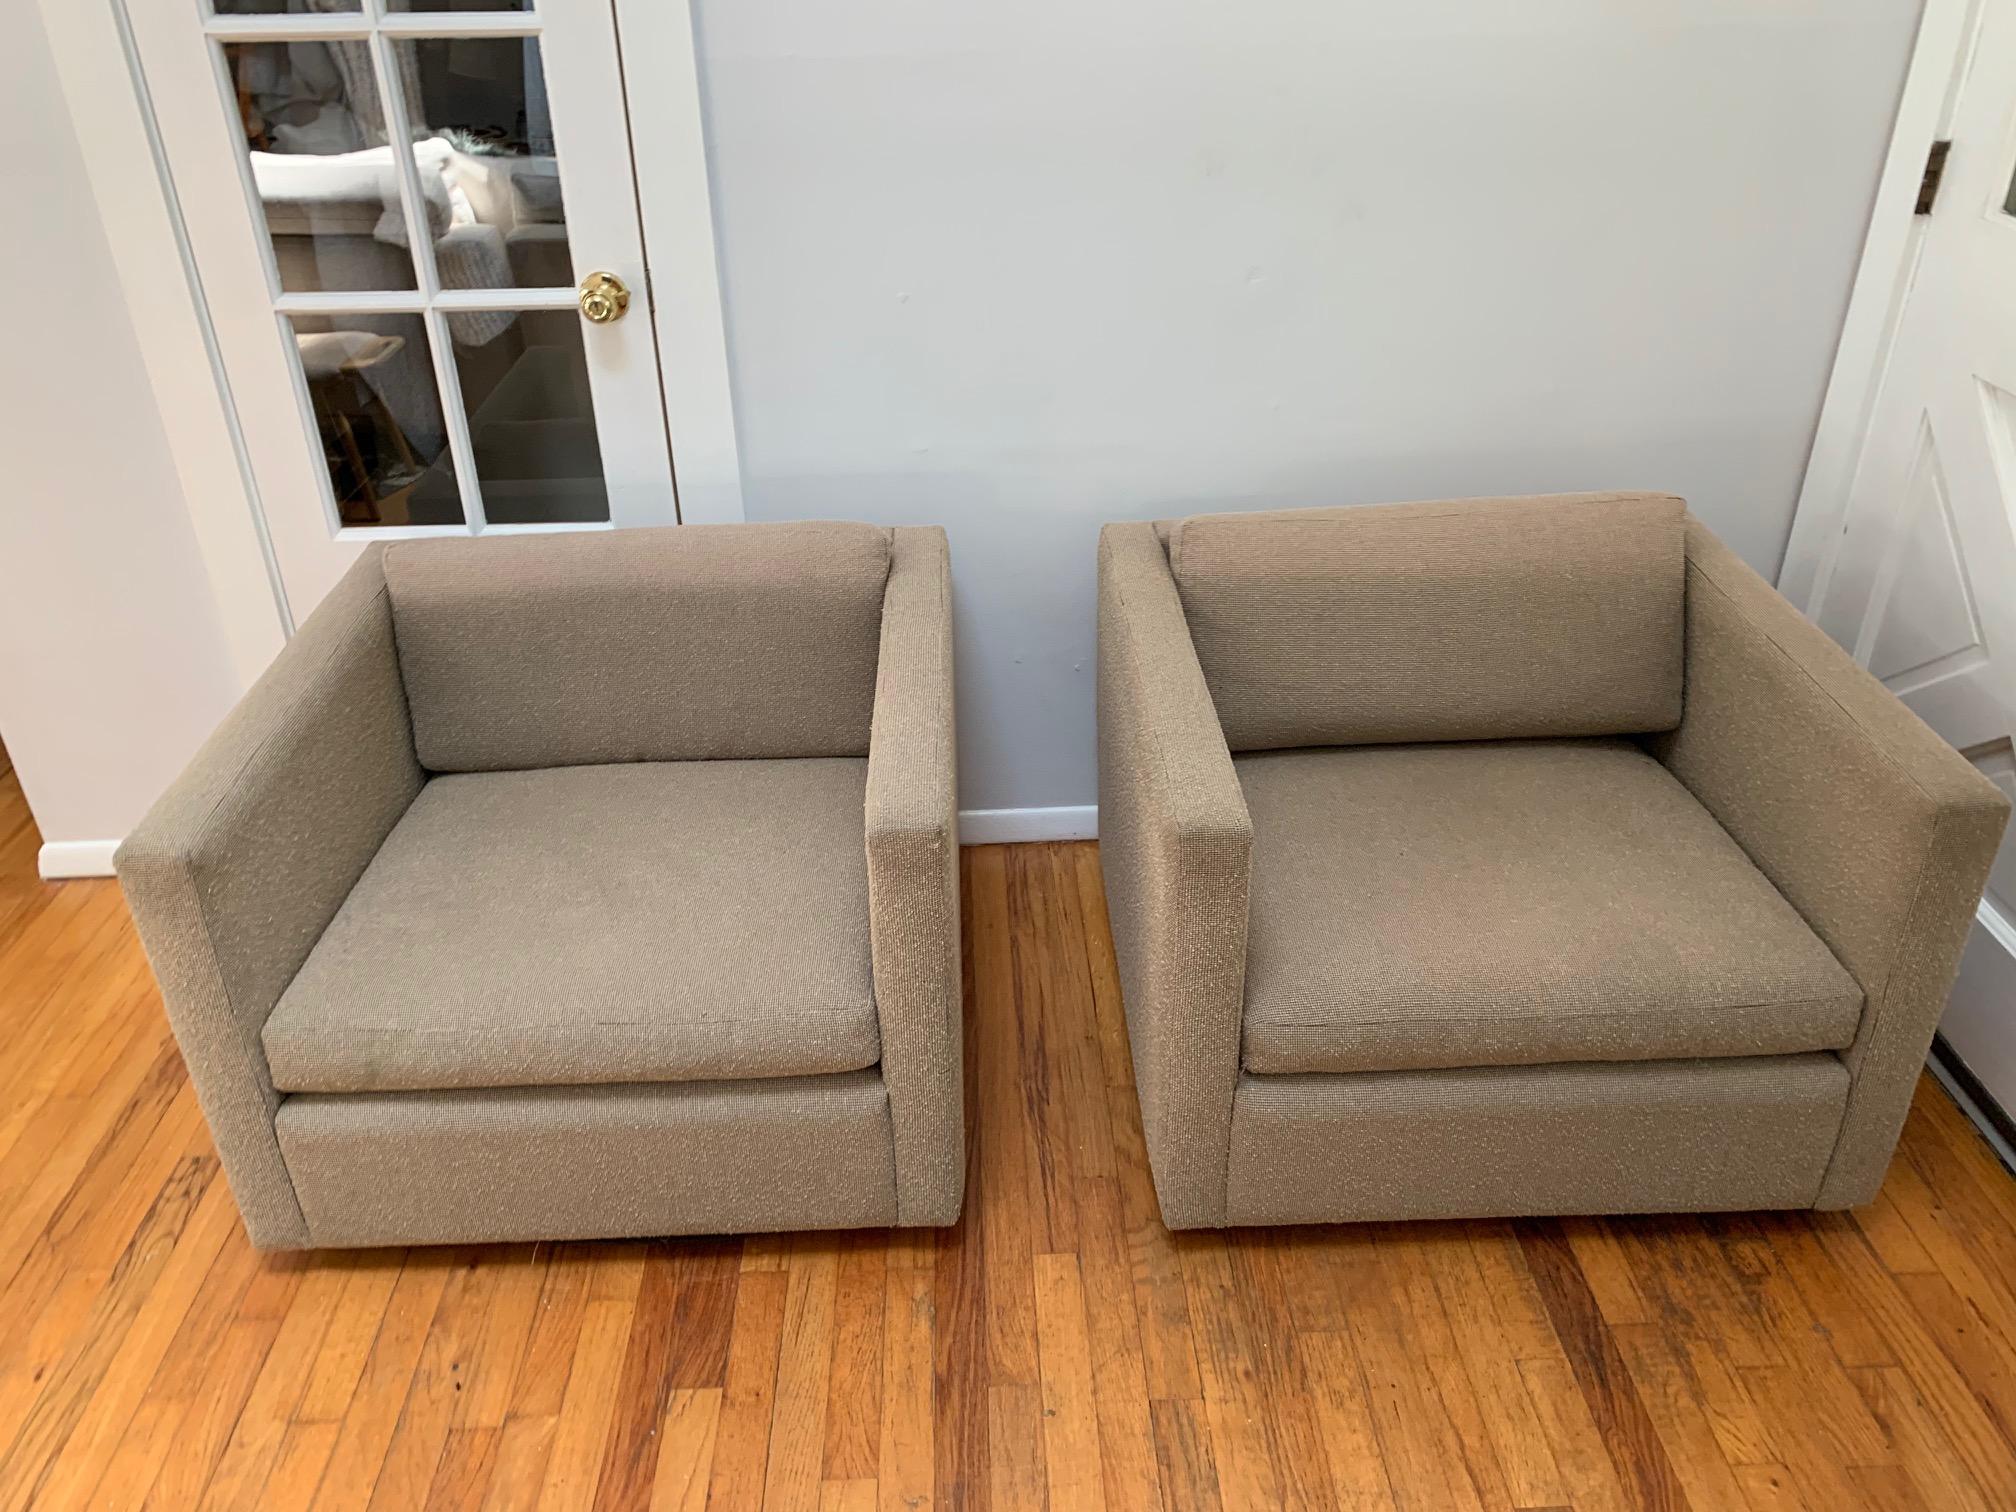 Pair of Pfister lounge chairs 1971 for Knoll, 1980s
Original boucle Knoll fabric
Hardwood frame, boucle fabric, steel legs. Made in USA

Measures: 33